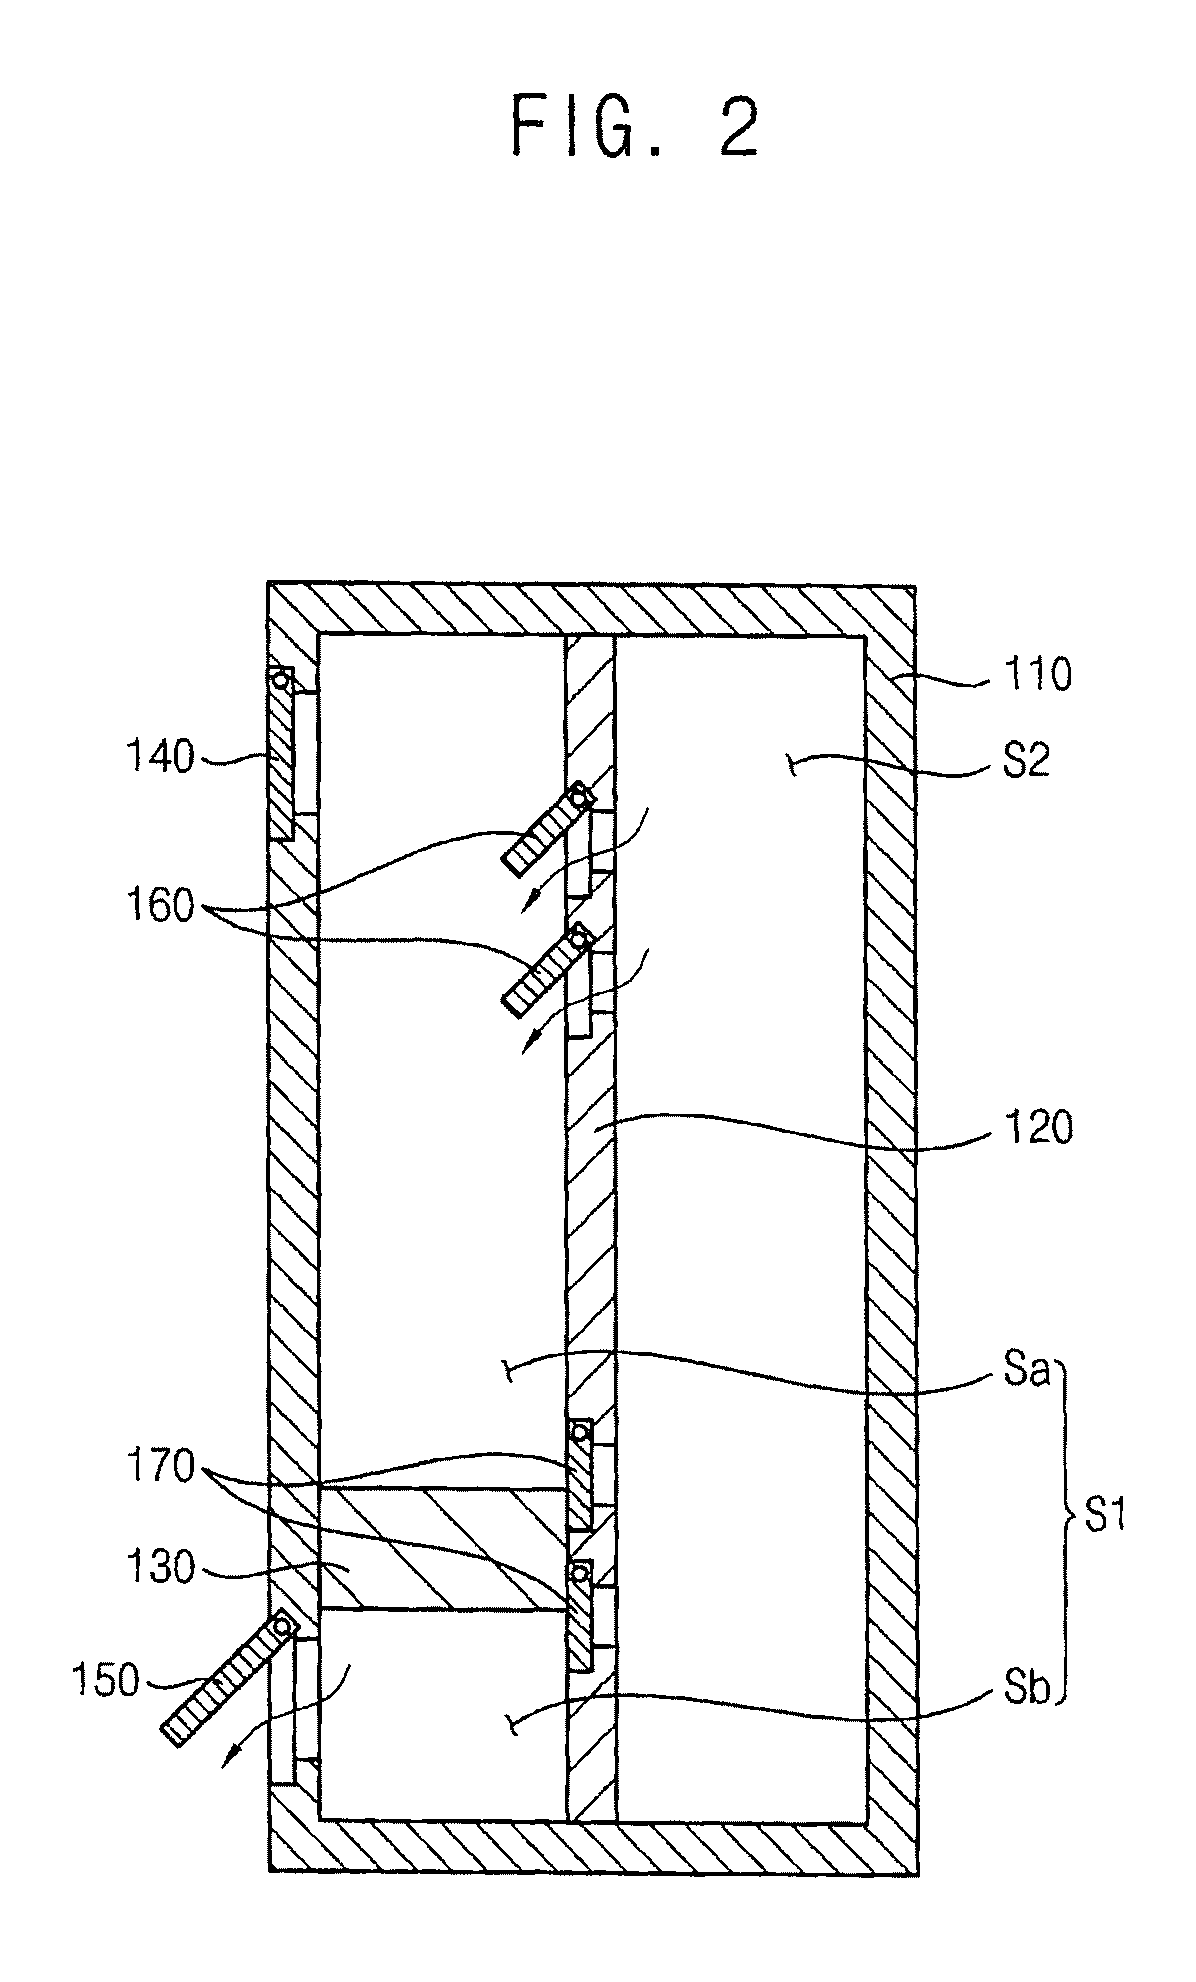 Unit for eliminating particles and apparatus for transferring a substrate having the same